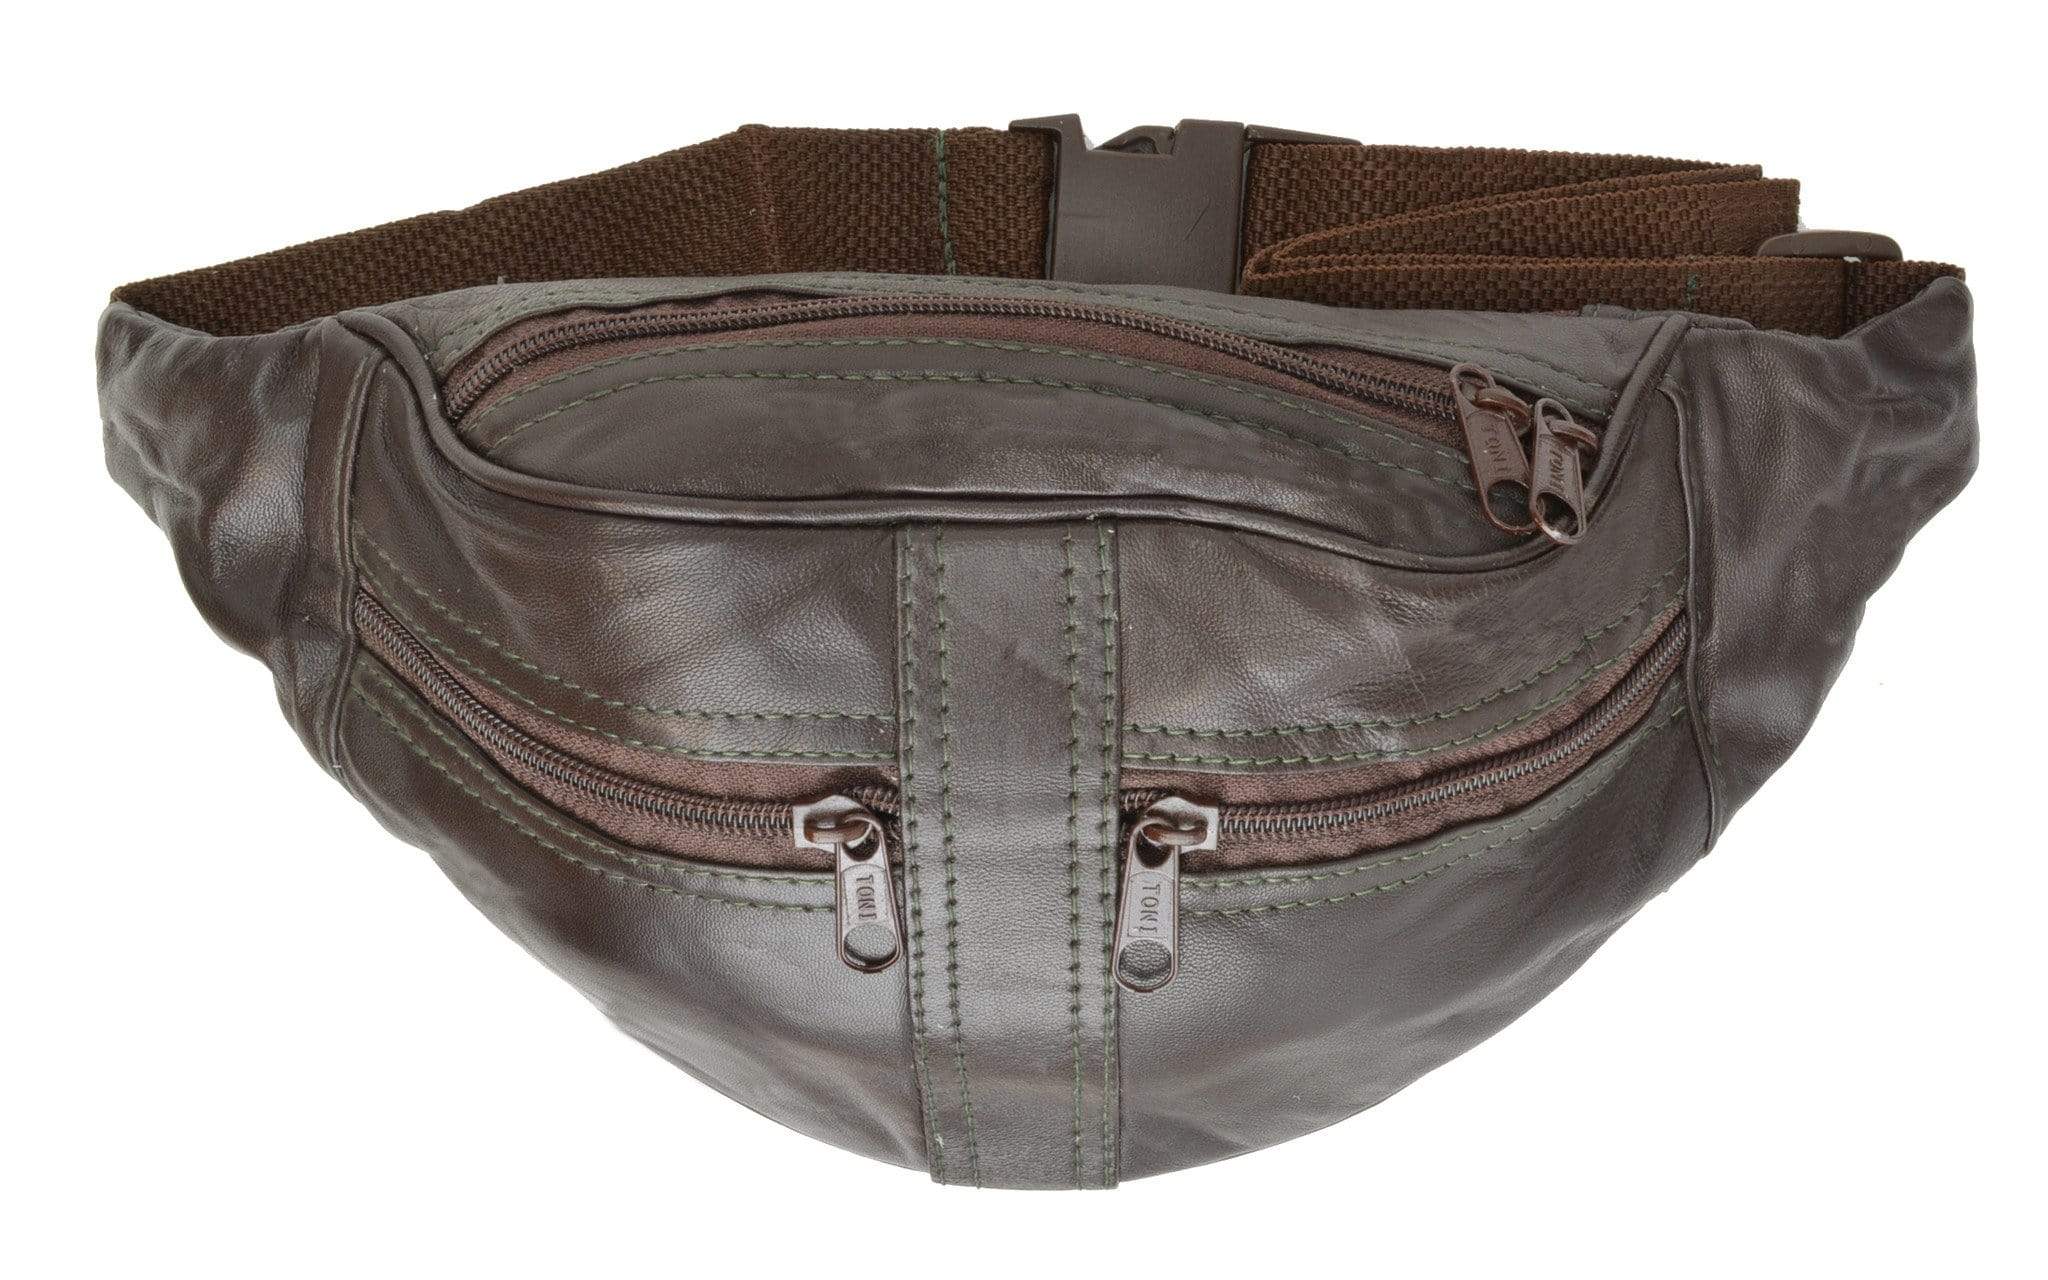 Leather Fanny Pack | Leather Fanny Packs, Waist Bags & Belt Bags - image 3 of 7